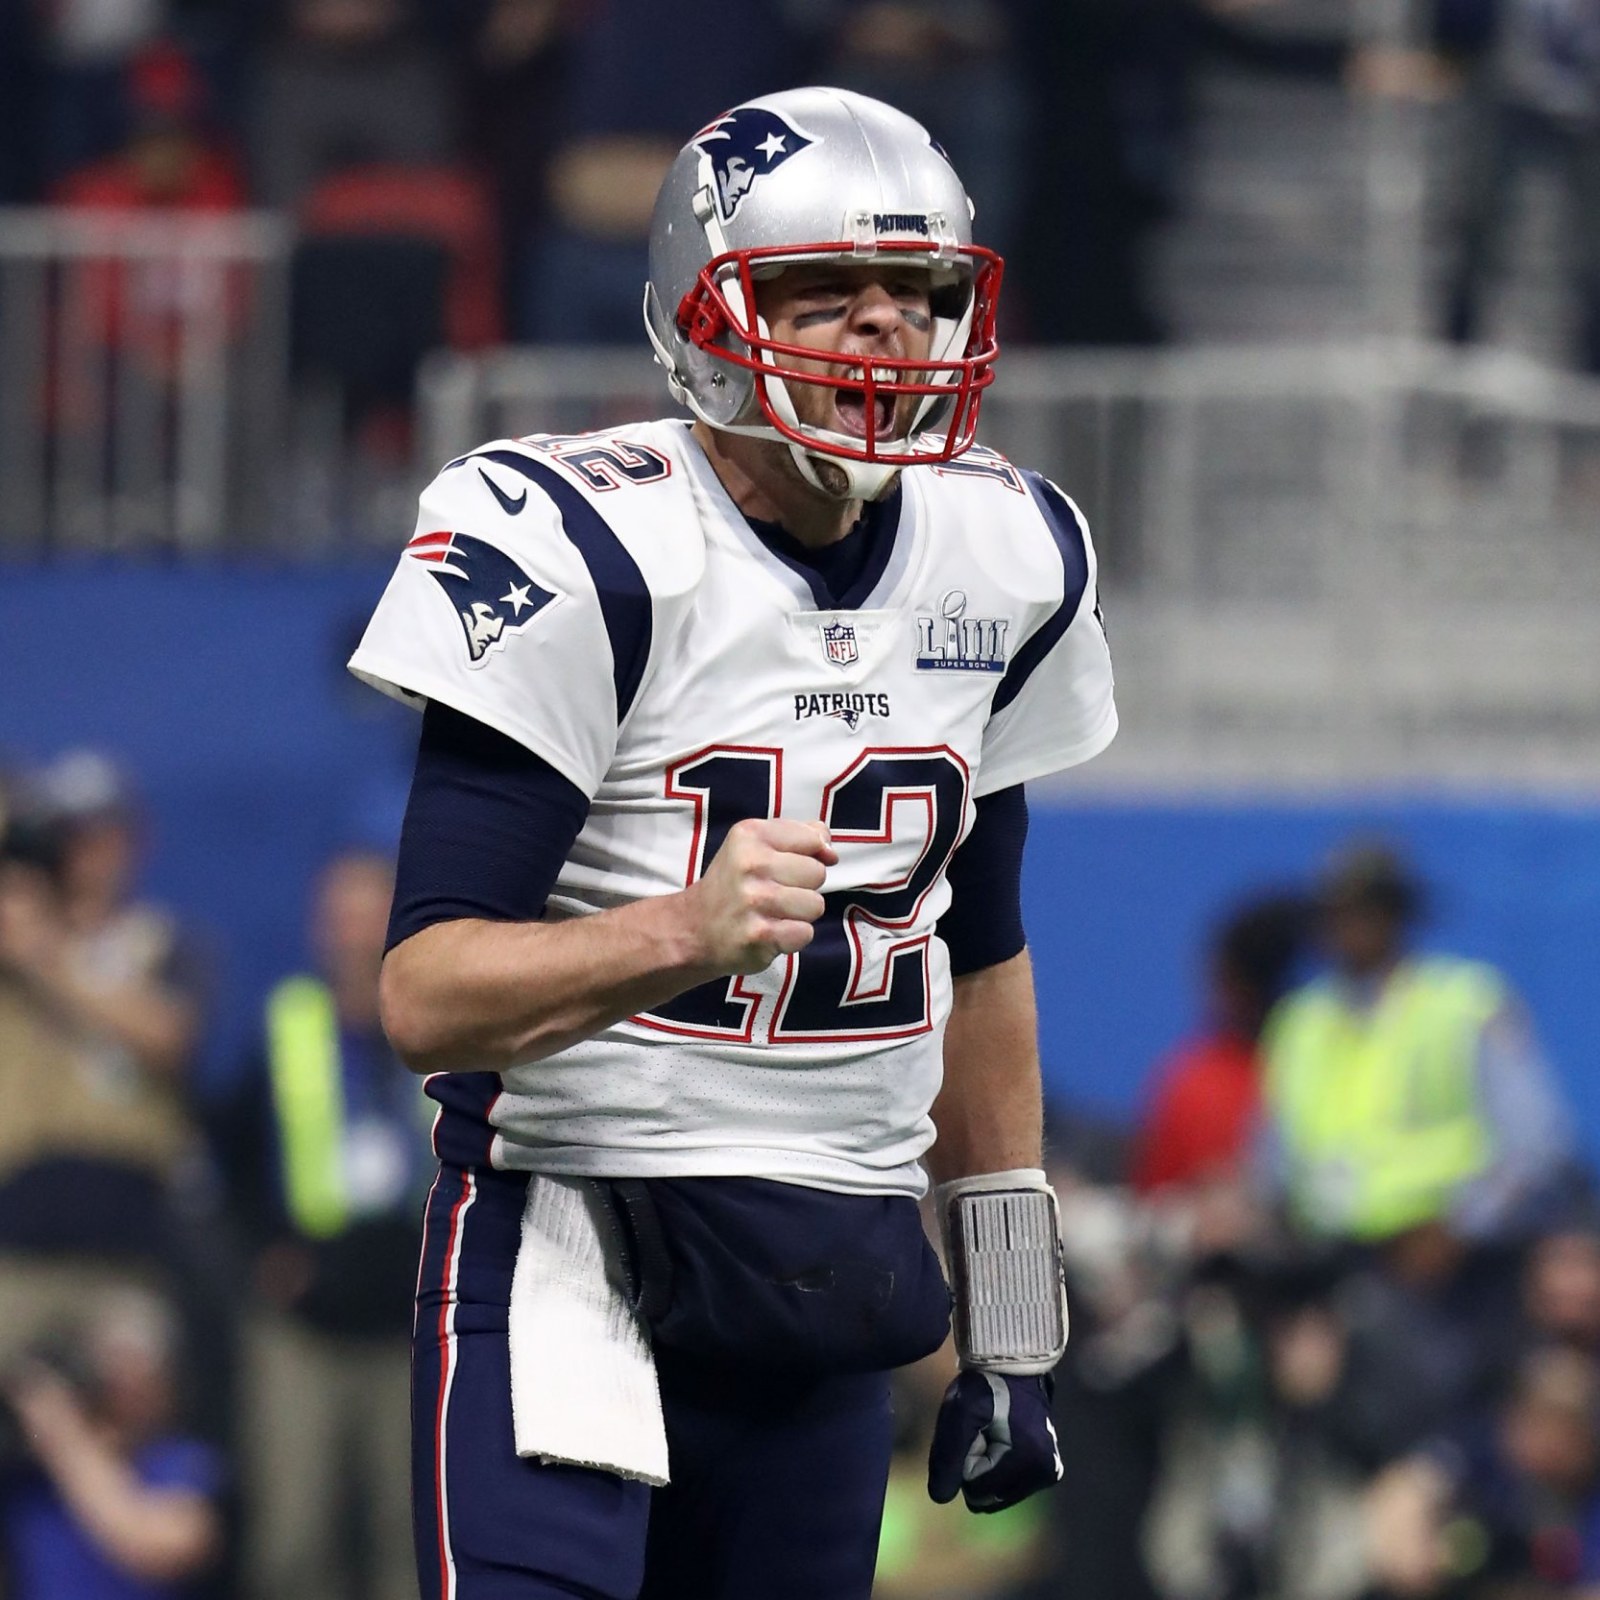 The GOAT': Best Twitter Reactions as Brady and Patriots Win Sixth Super Bowl